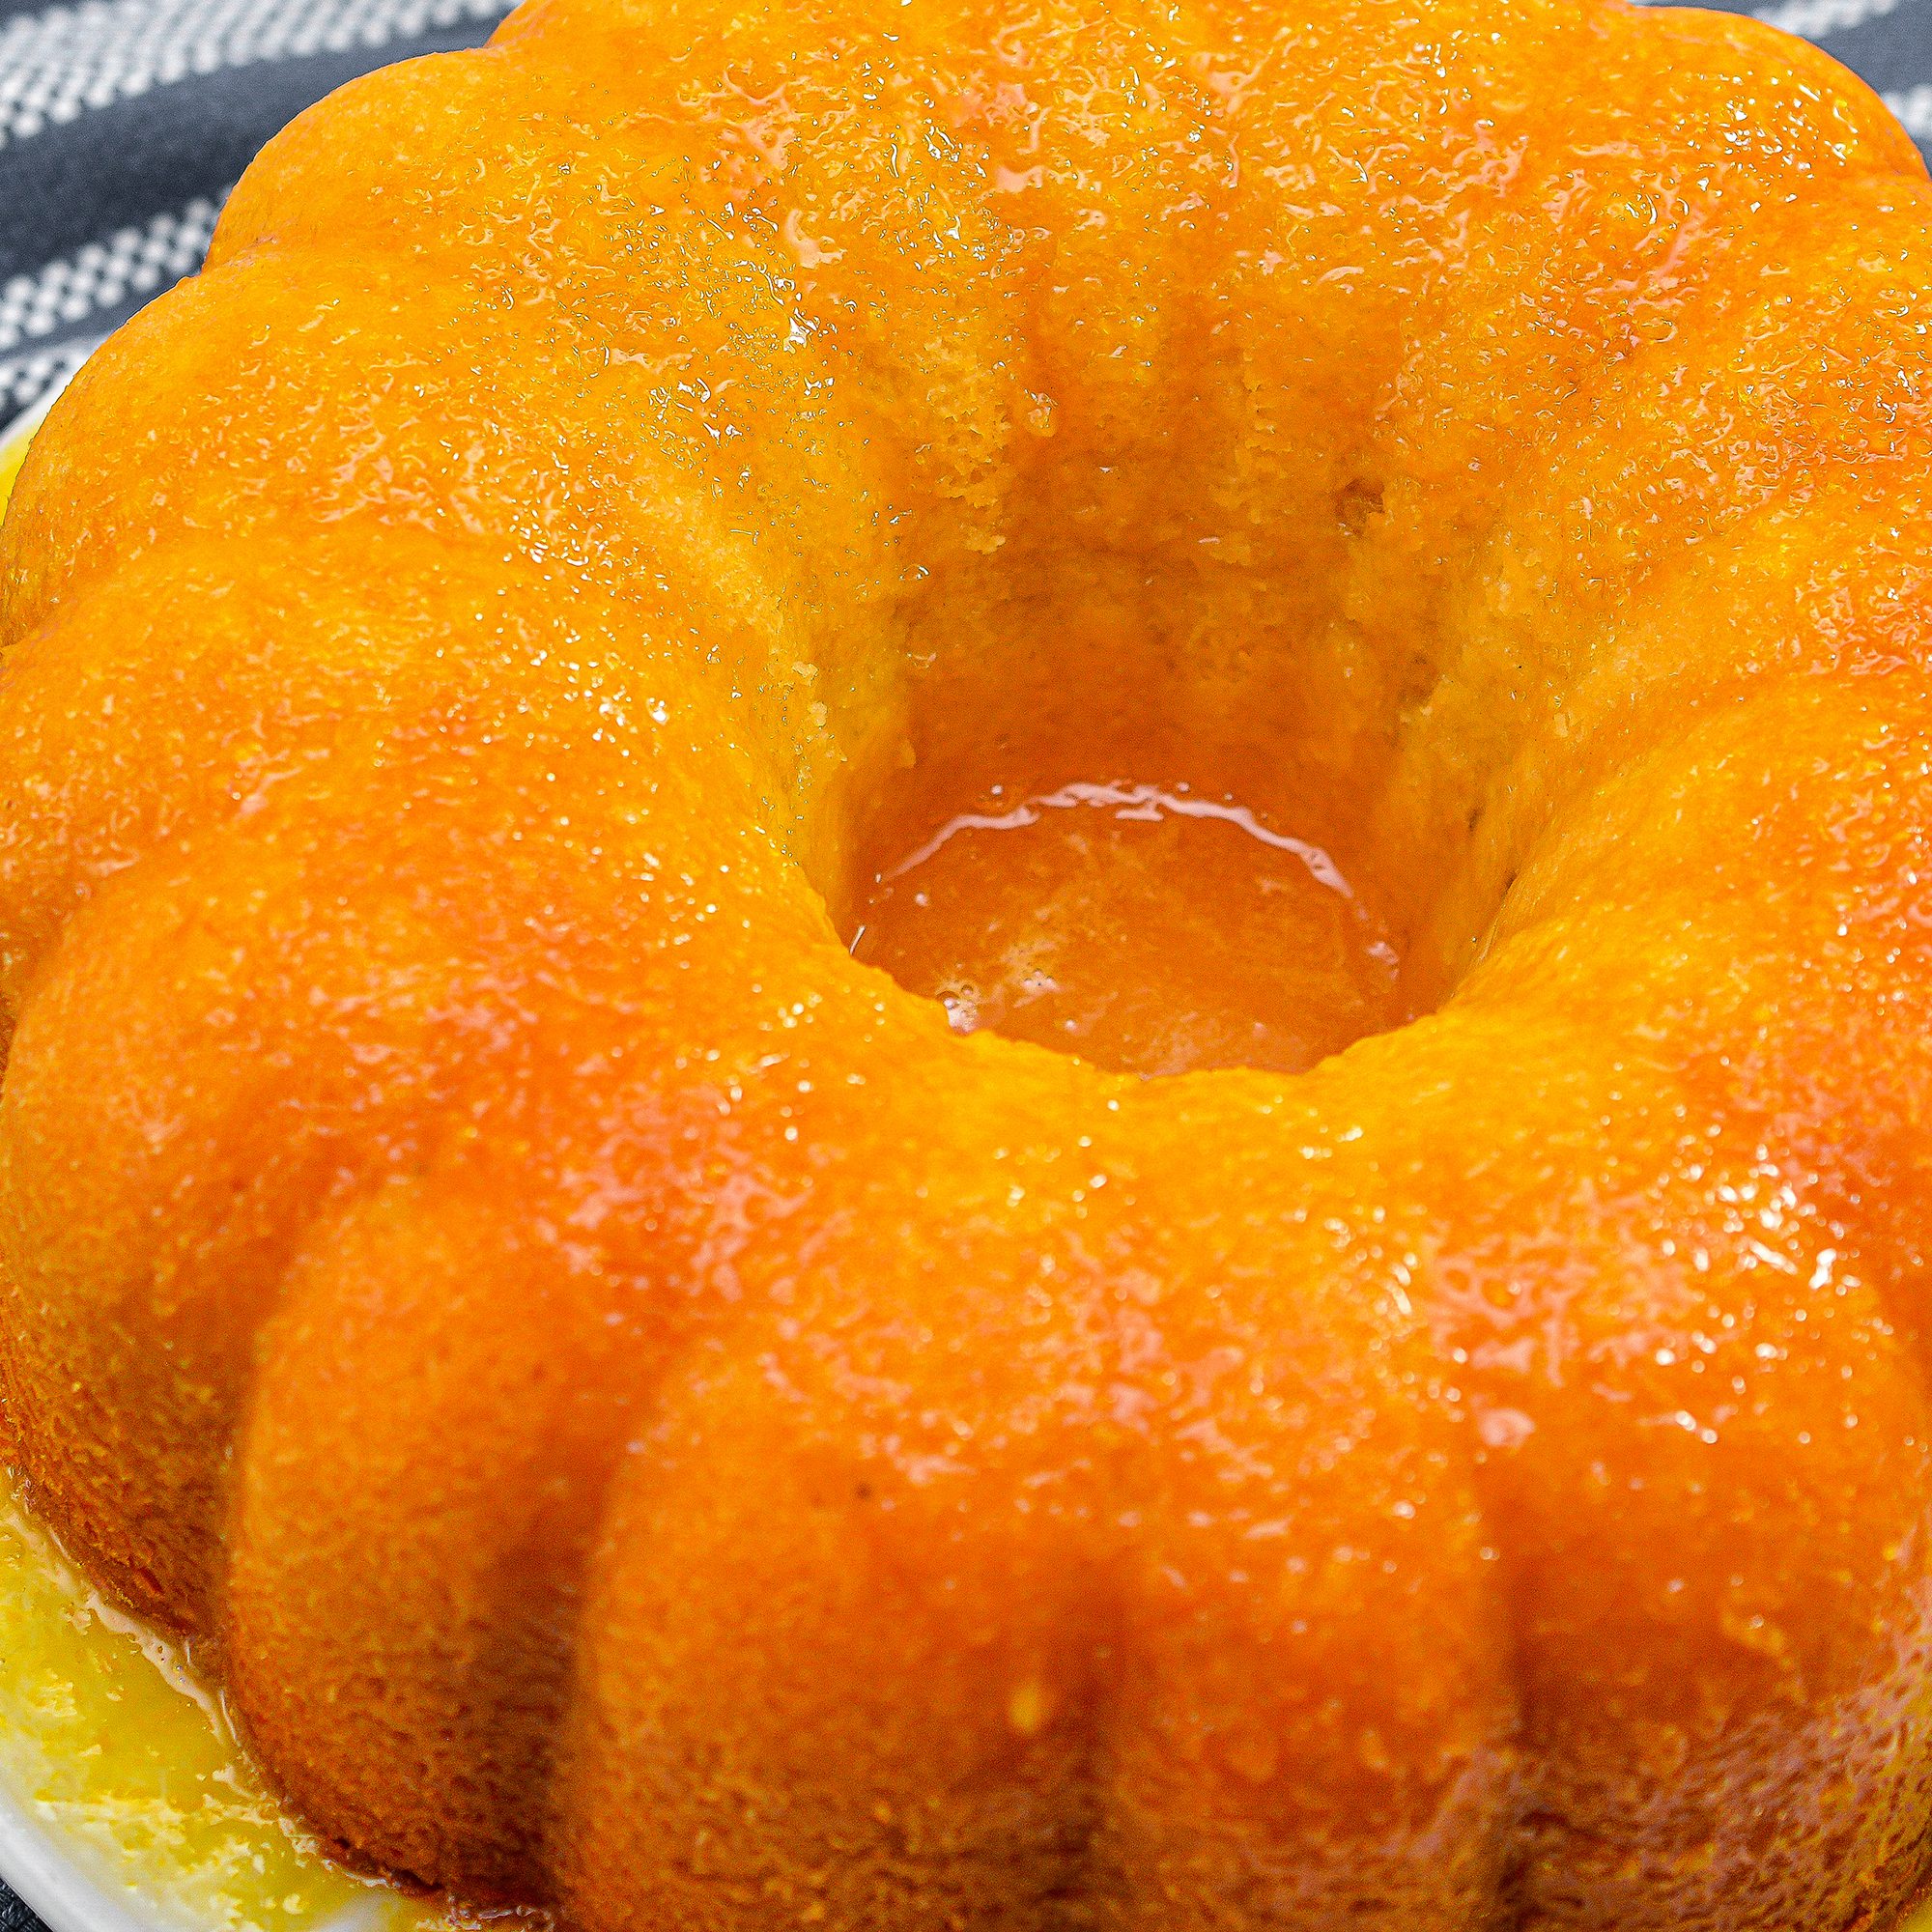  Pour the glaze over the cake and let sit for 10 minutes before serving.